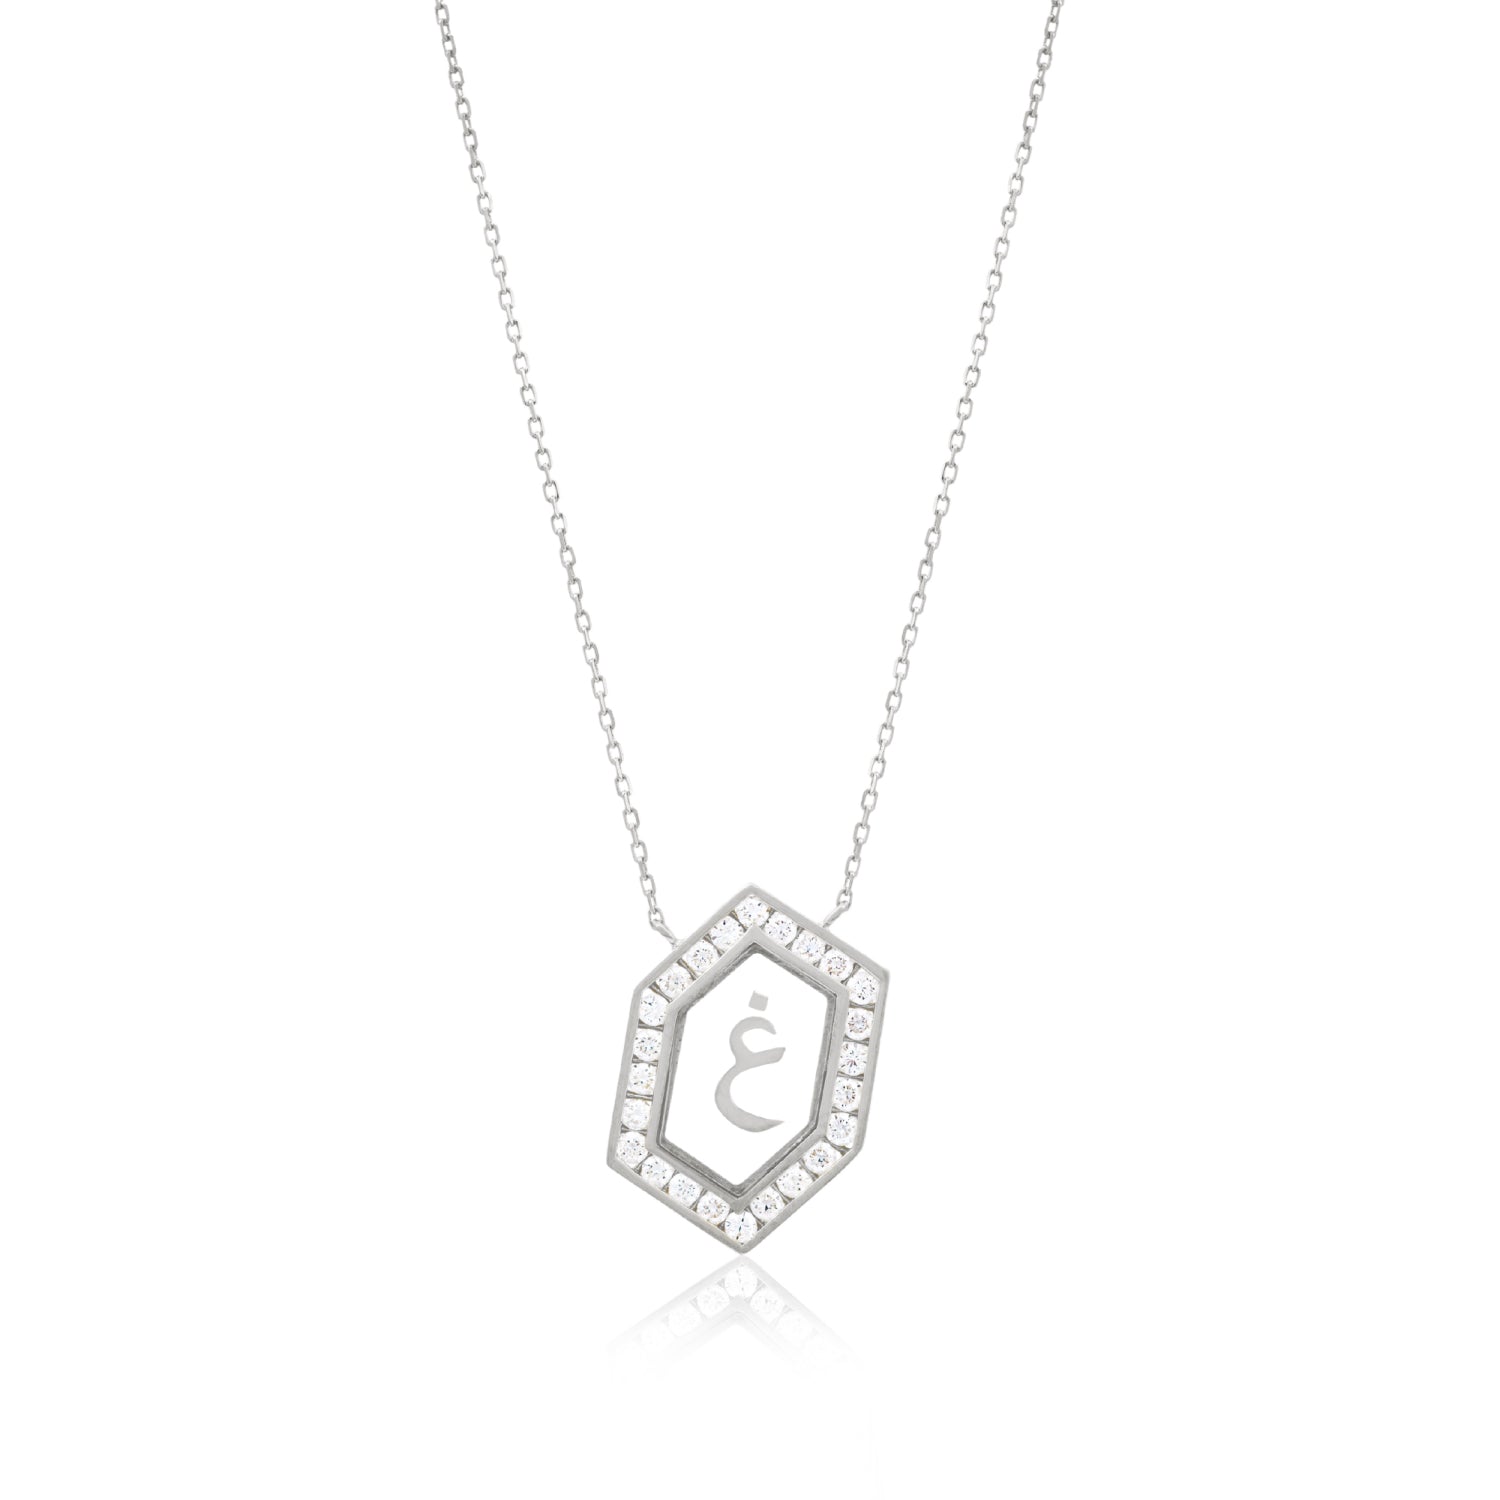 Qamoos 1.0 Letter غ Diamond Necklace in White Gold